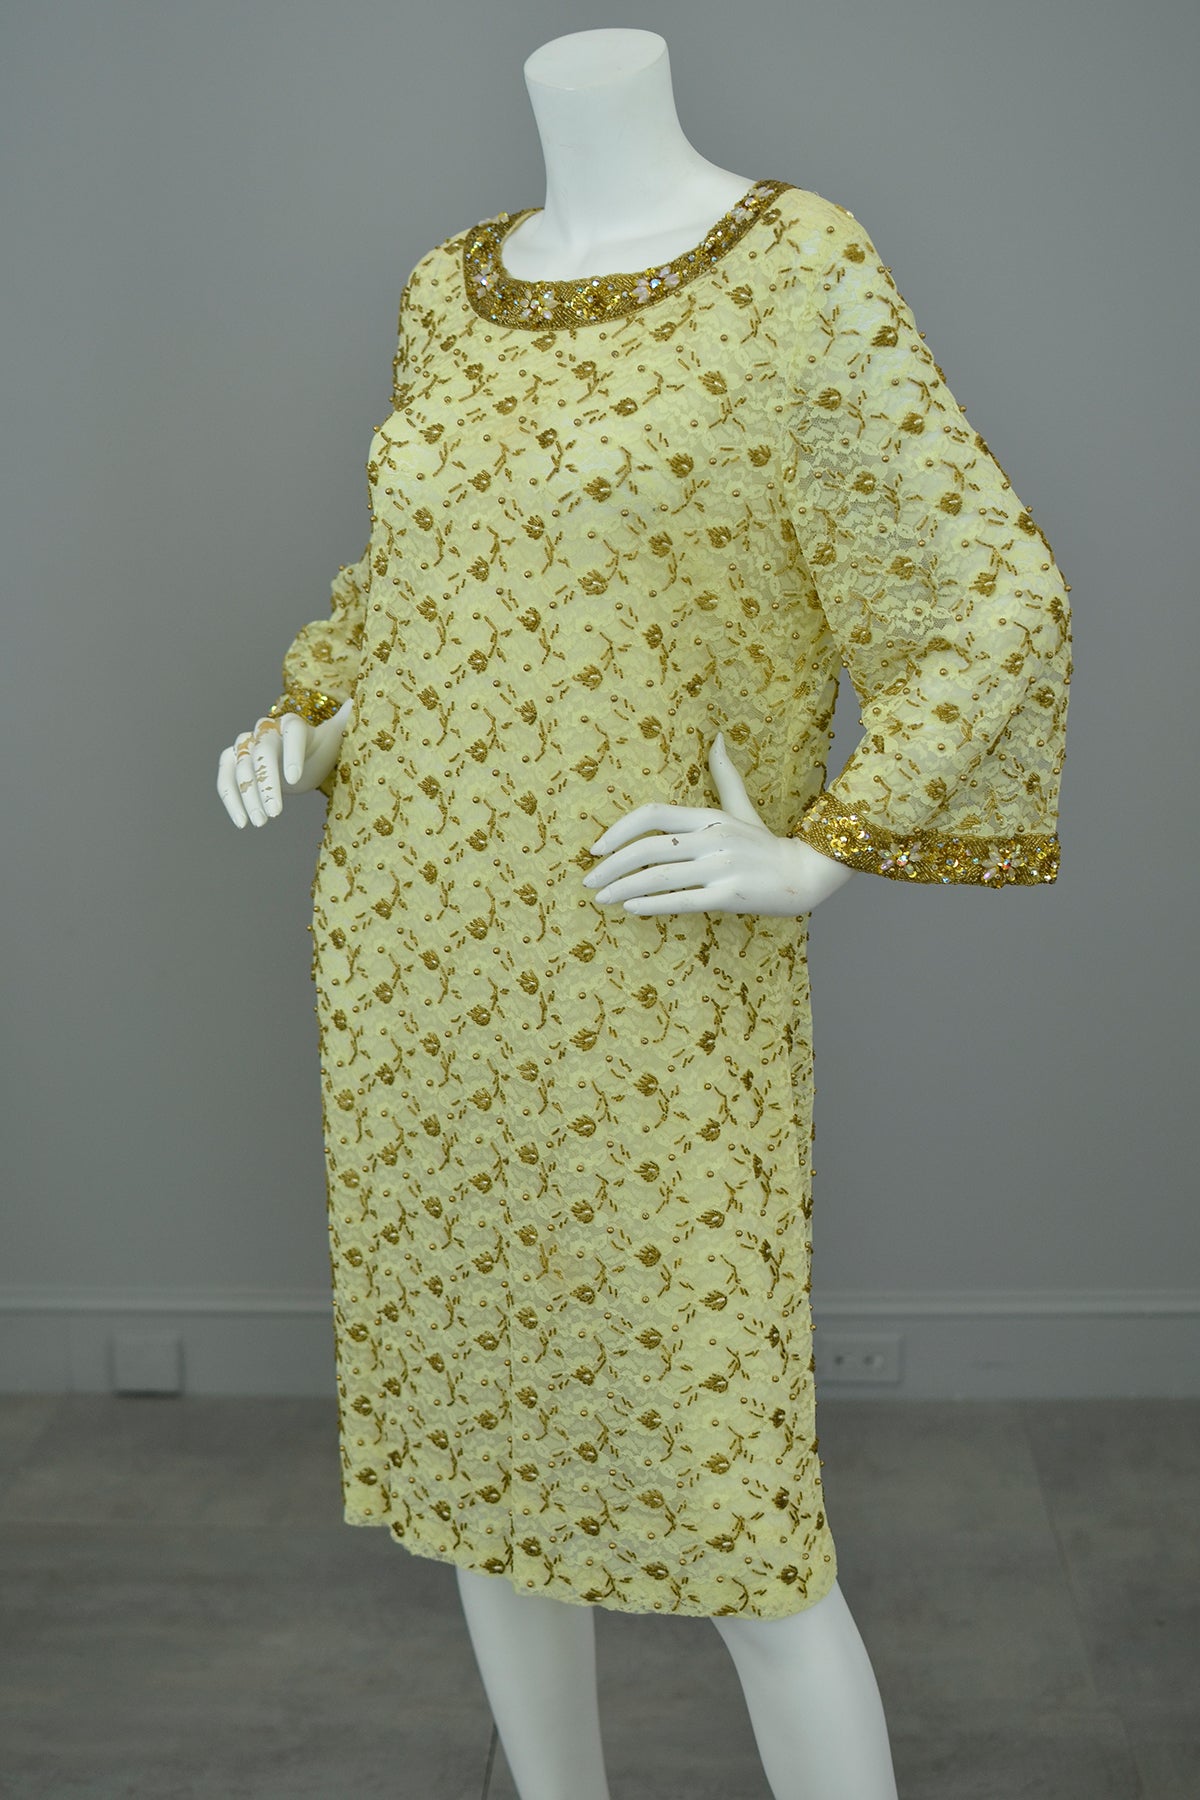 1960s Gold Beaded Lace Bell Sleeves Party Dress